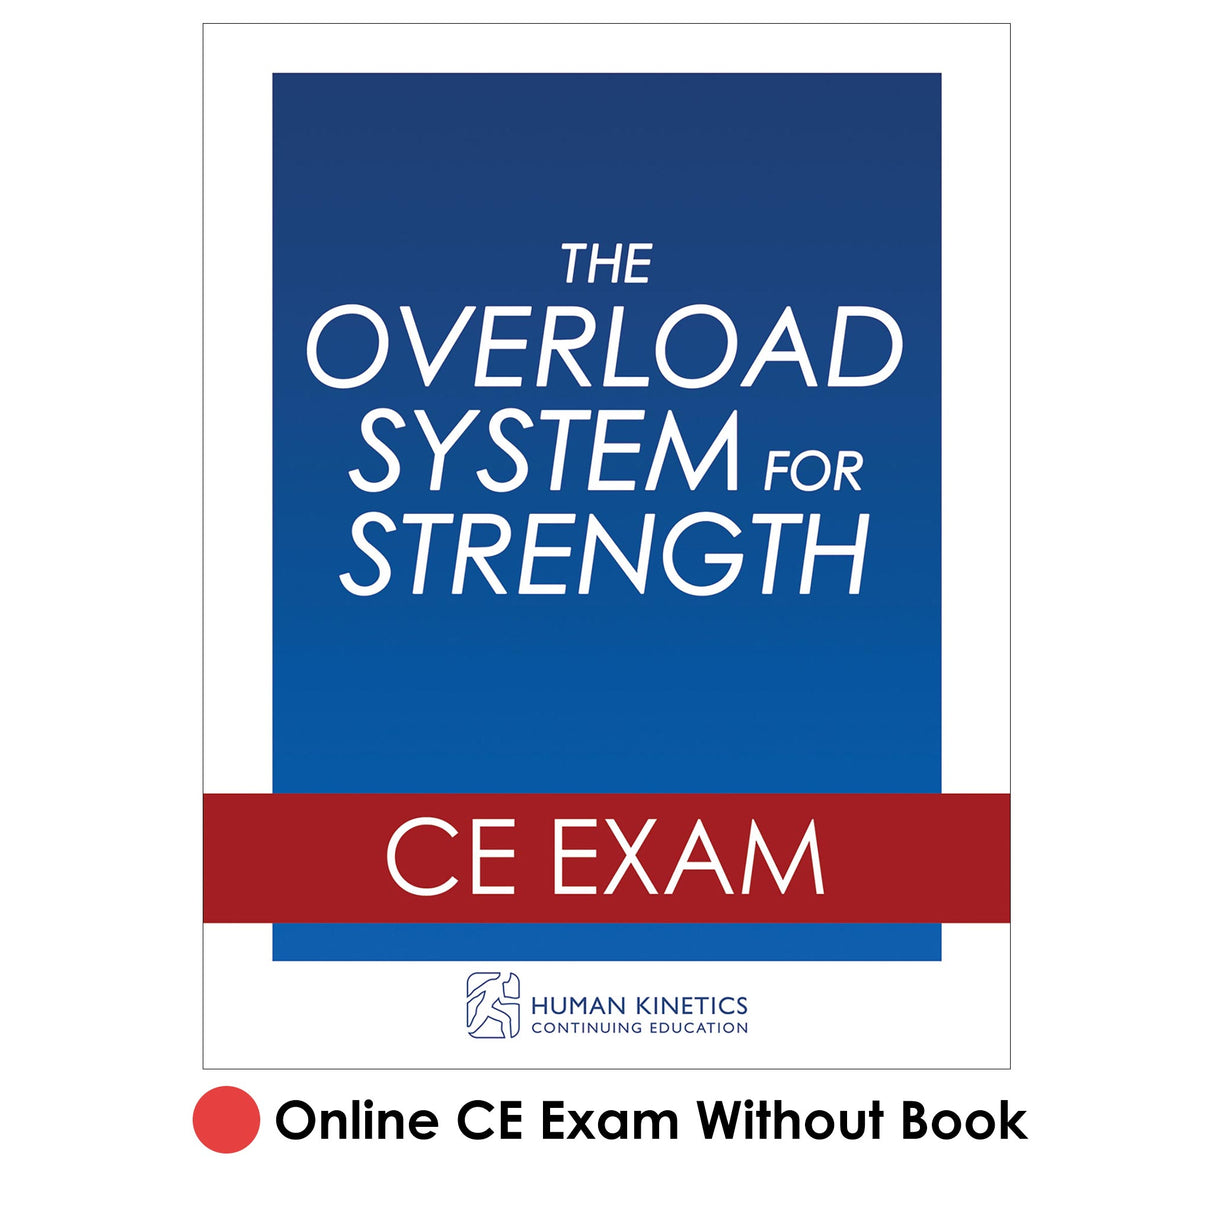 Overload System for Strength Online CE Exam Without Book, The